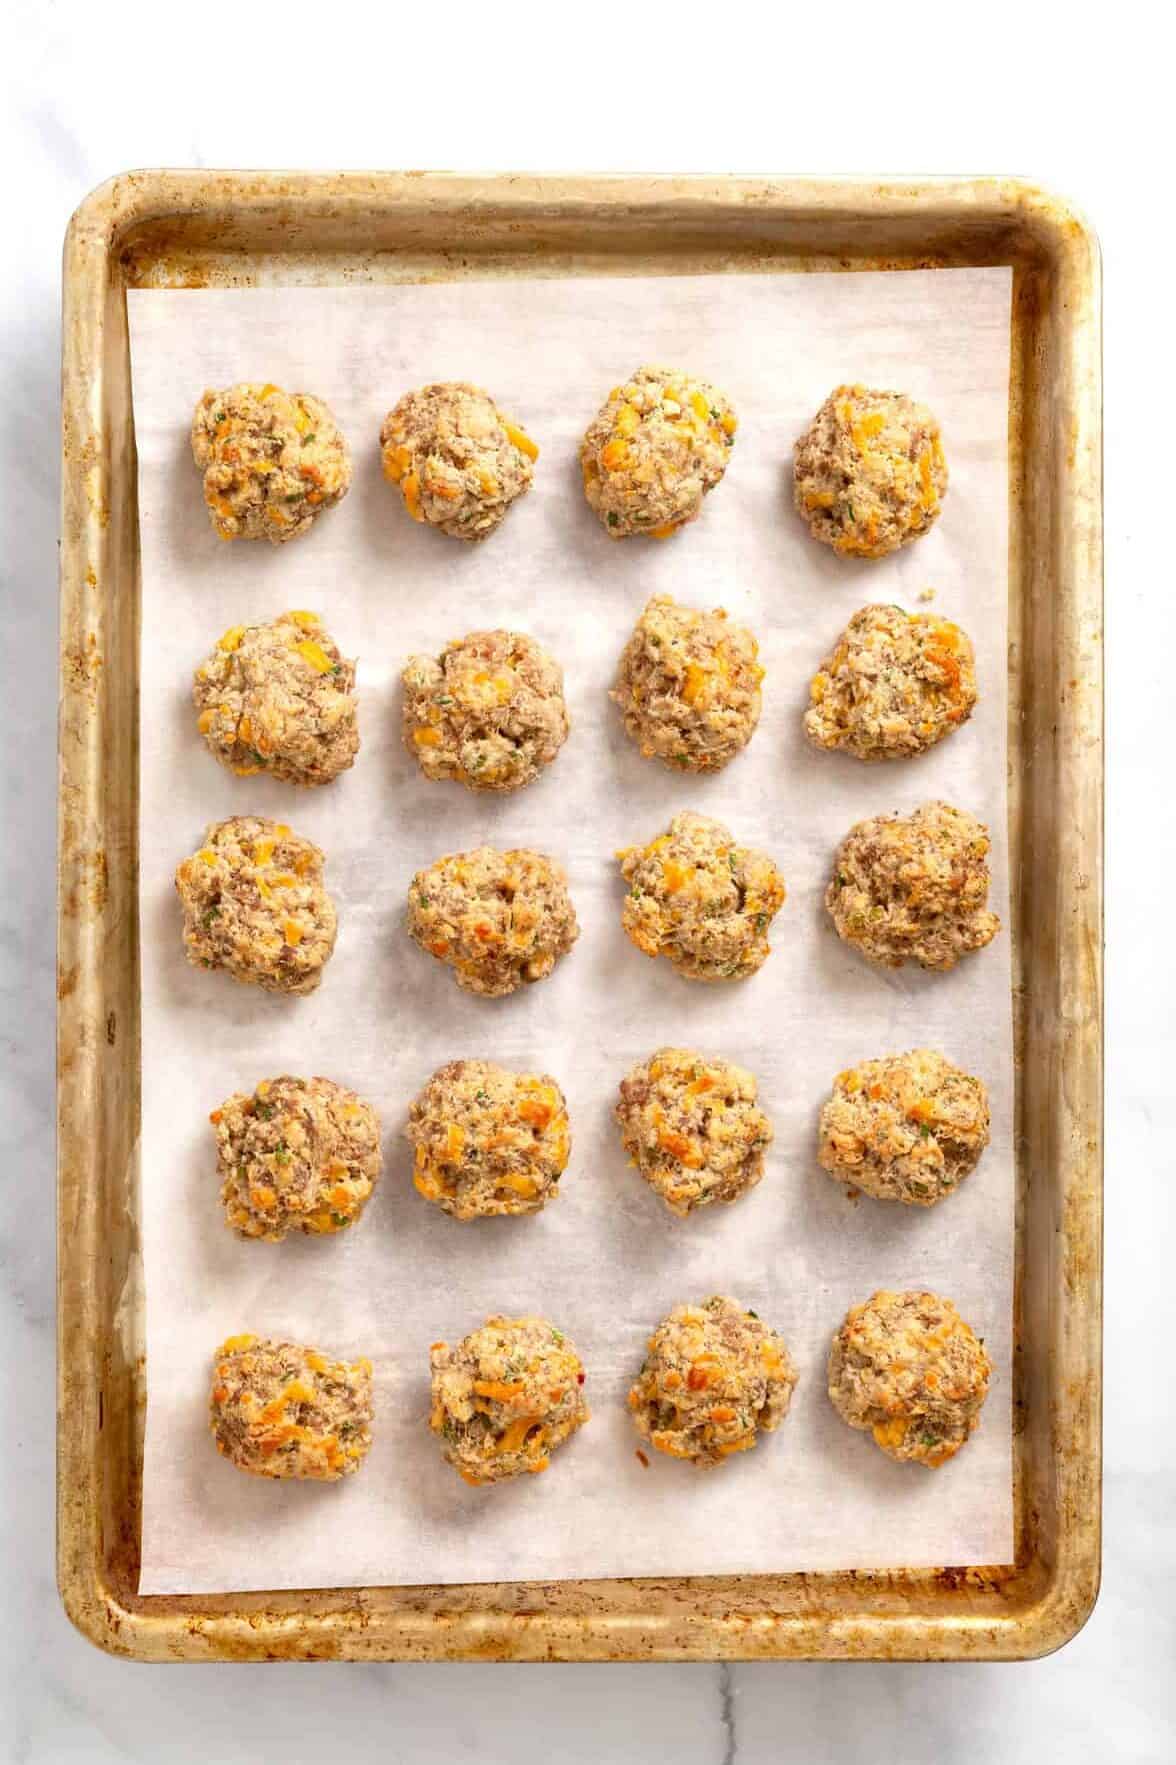 20 baked cream cheese sausage balls sitting on a parchment-lined baking sheet.